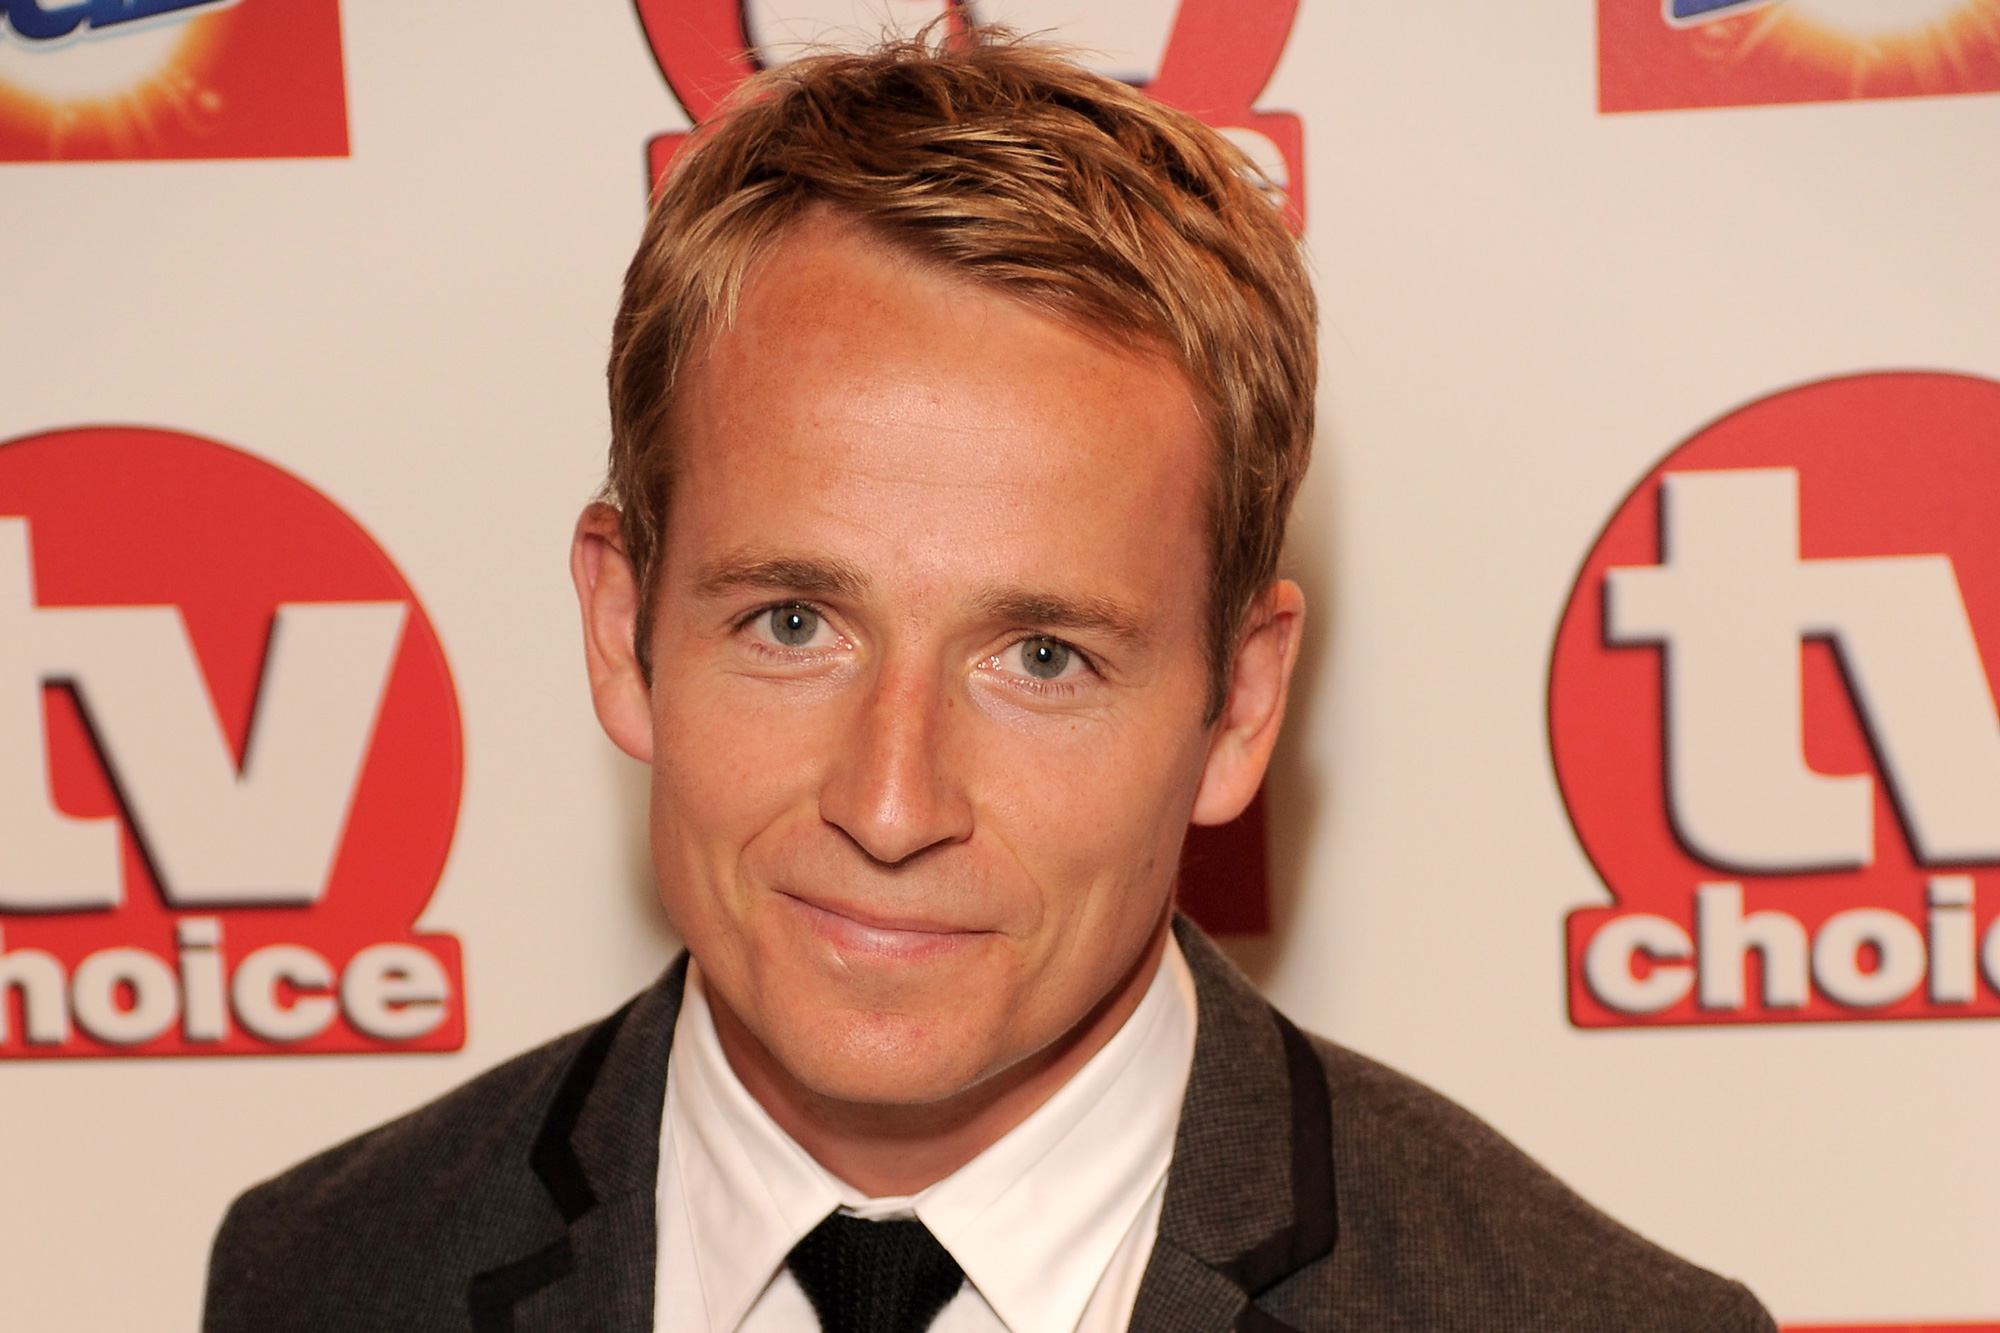 Jonnie Irwin arrives at the TV Choice Awards 2010 at The Dorchester on September 6, 2010 in London, England.